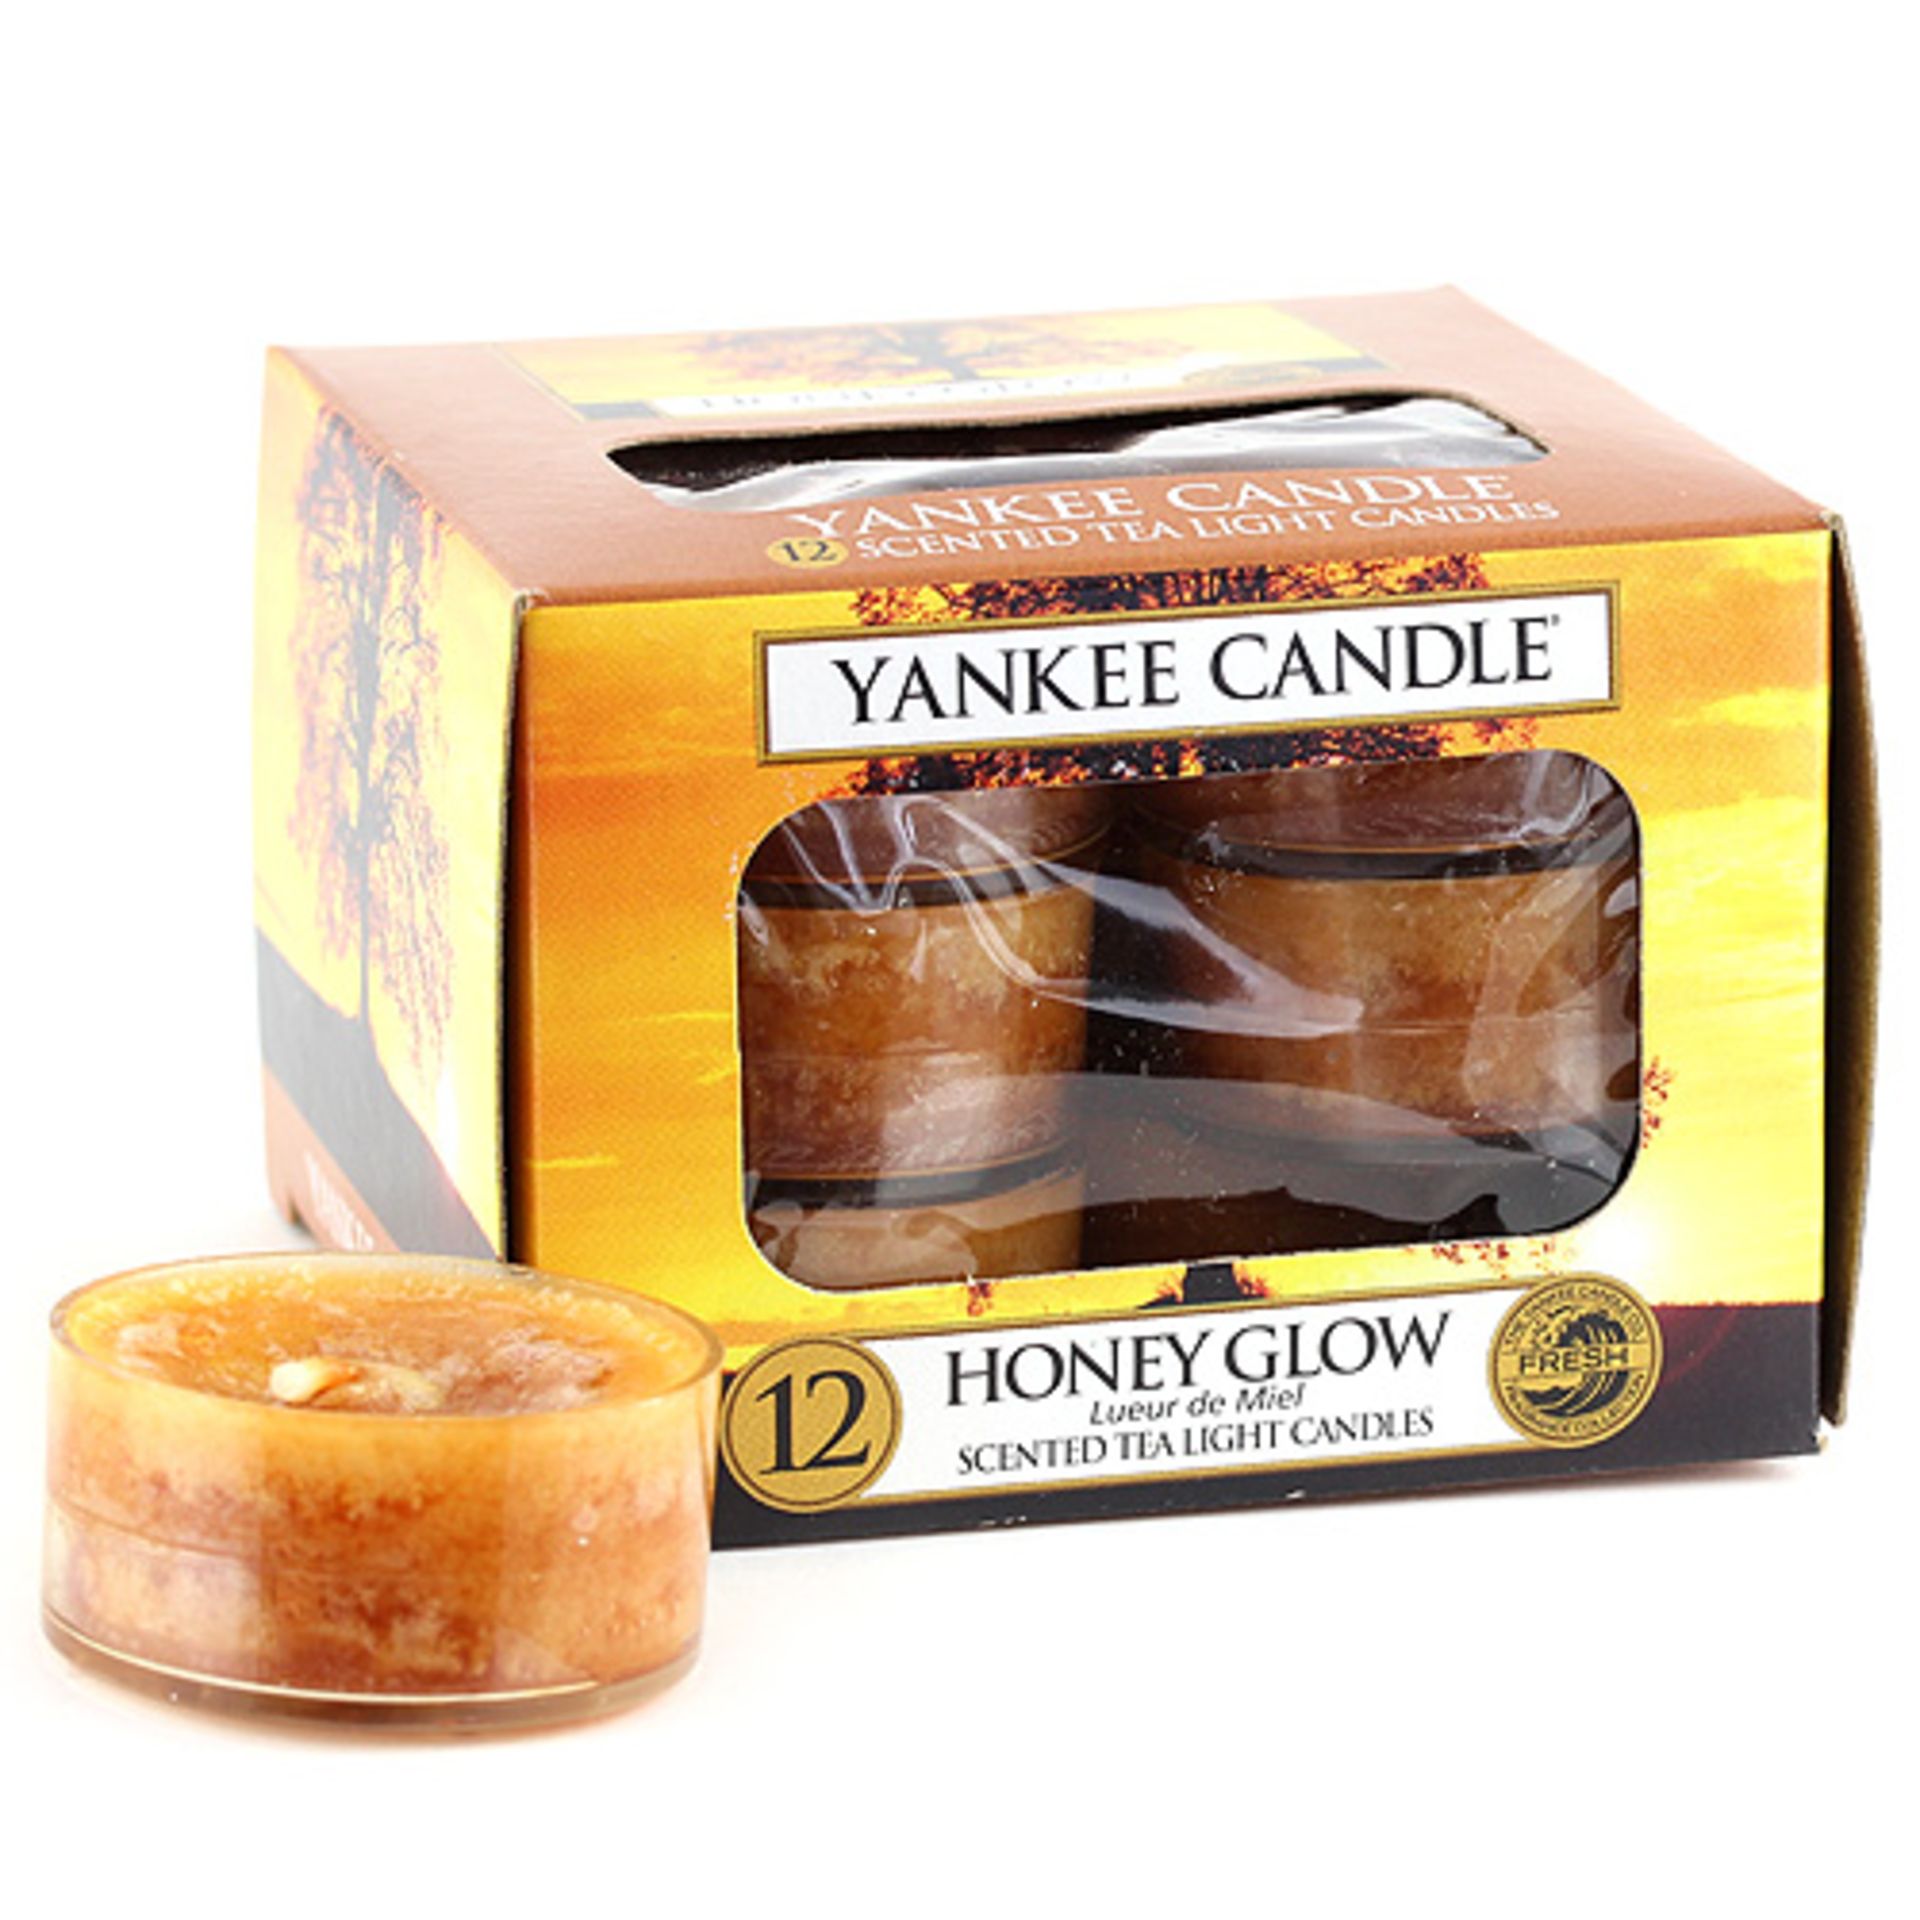 V Brand New 12 Yankee Candle Scented Tea Light Candles Honey Glow eBay Price £8.24